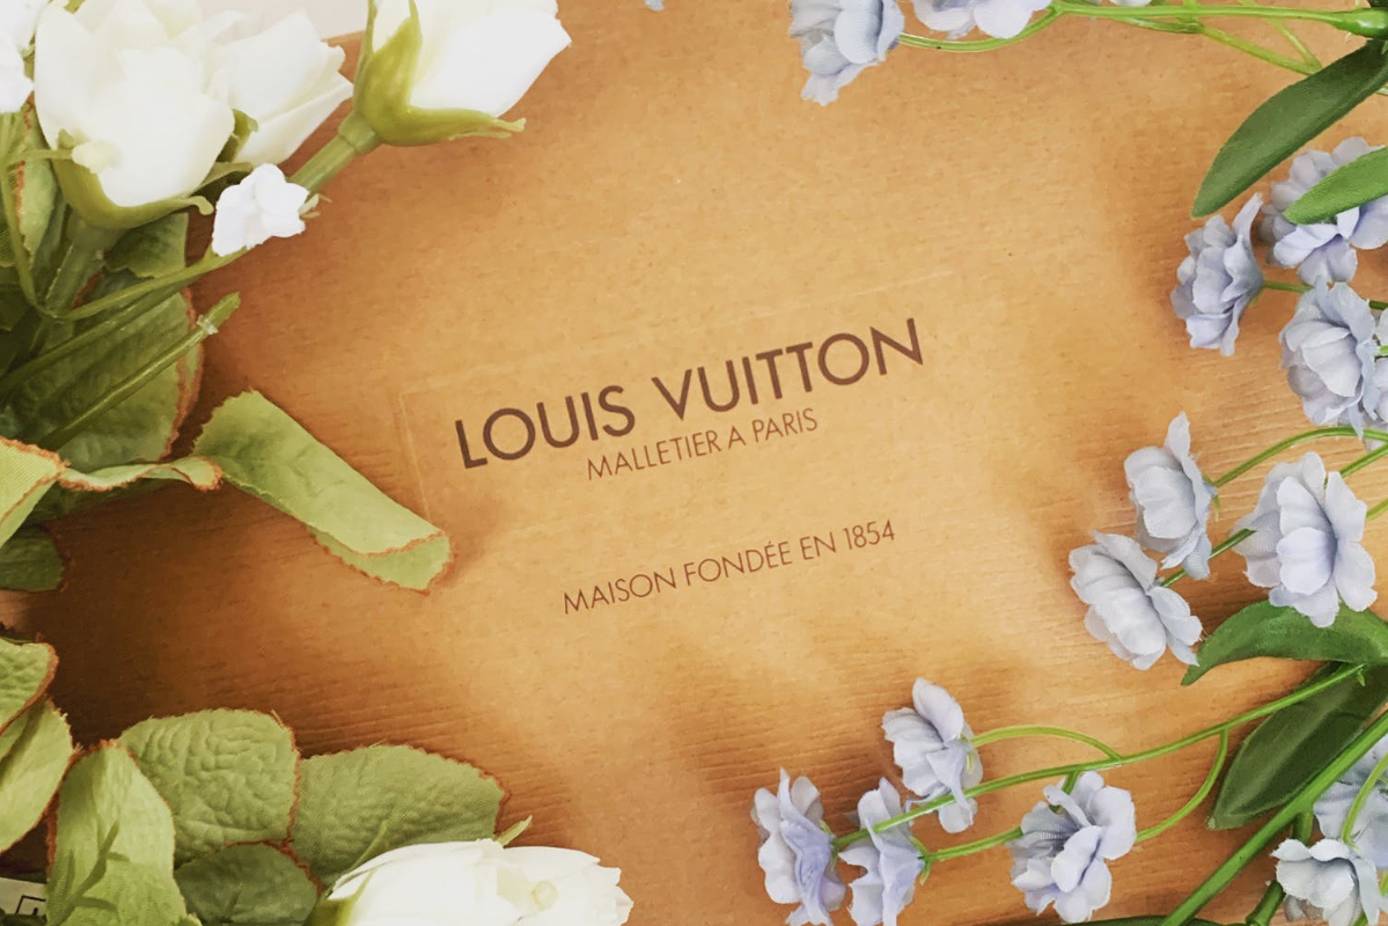 ranked as most valuable retail brand, Louis Vuitton highest in luxury  - BW Confidential